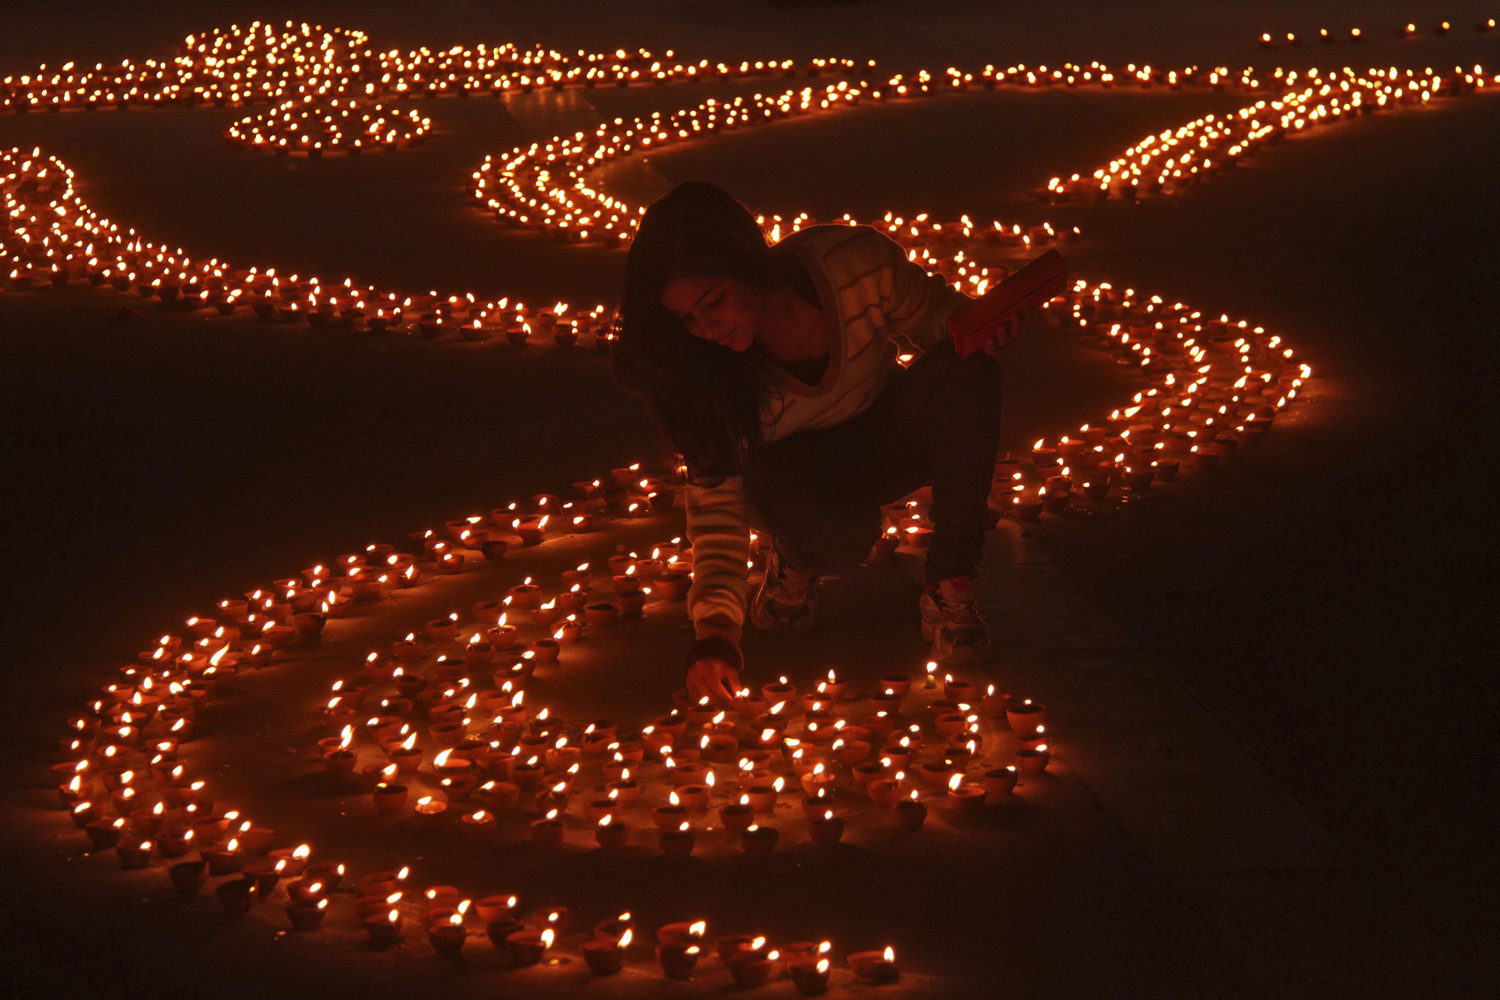 Image: Nov. 12, 2012. A girl lights earthen lamps in a formation to form the shape of the Hindu god Ganesh, the deity of prosperity, on the eve of Diwali, the Hindu festival of lights, in the northern Indian city of Chandigarh.